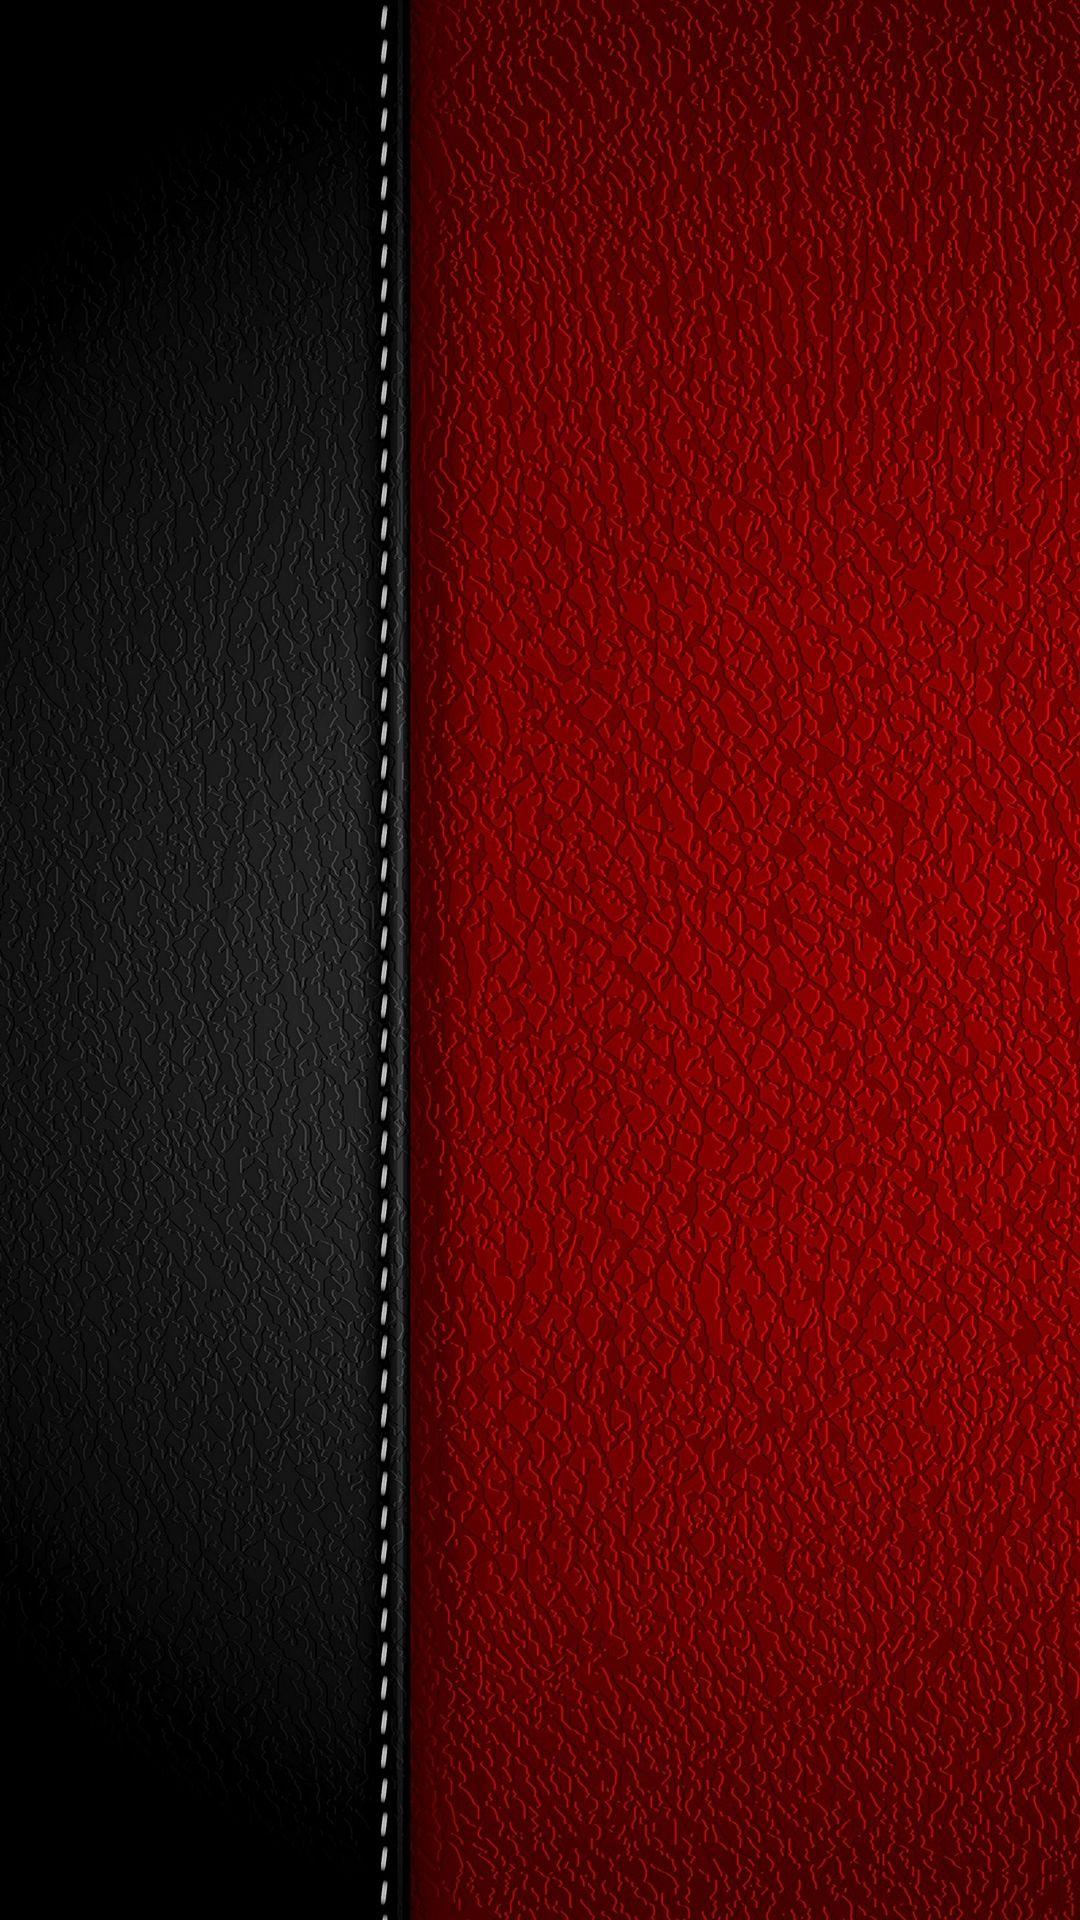 Leather iPhone Wallpapers Free Download